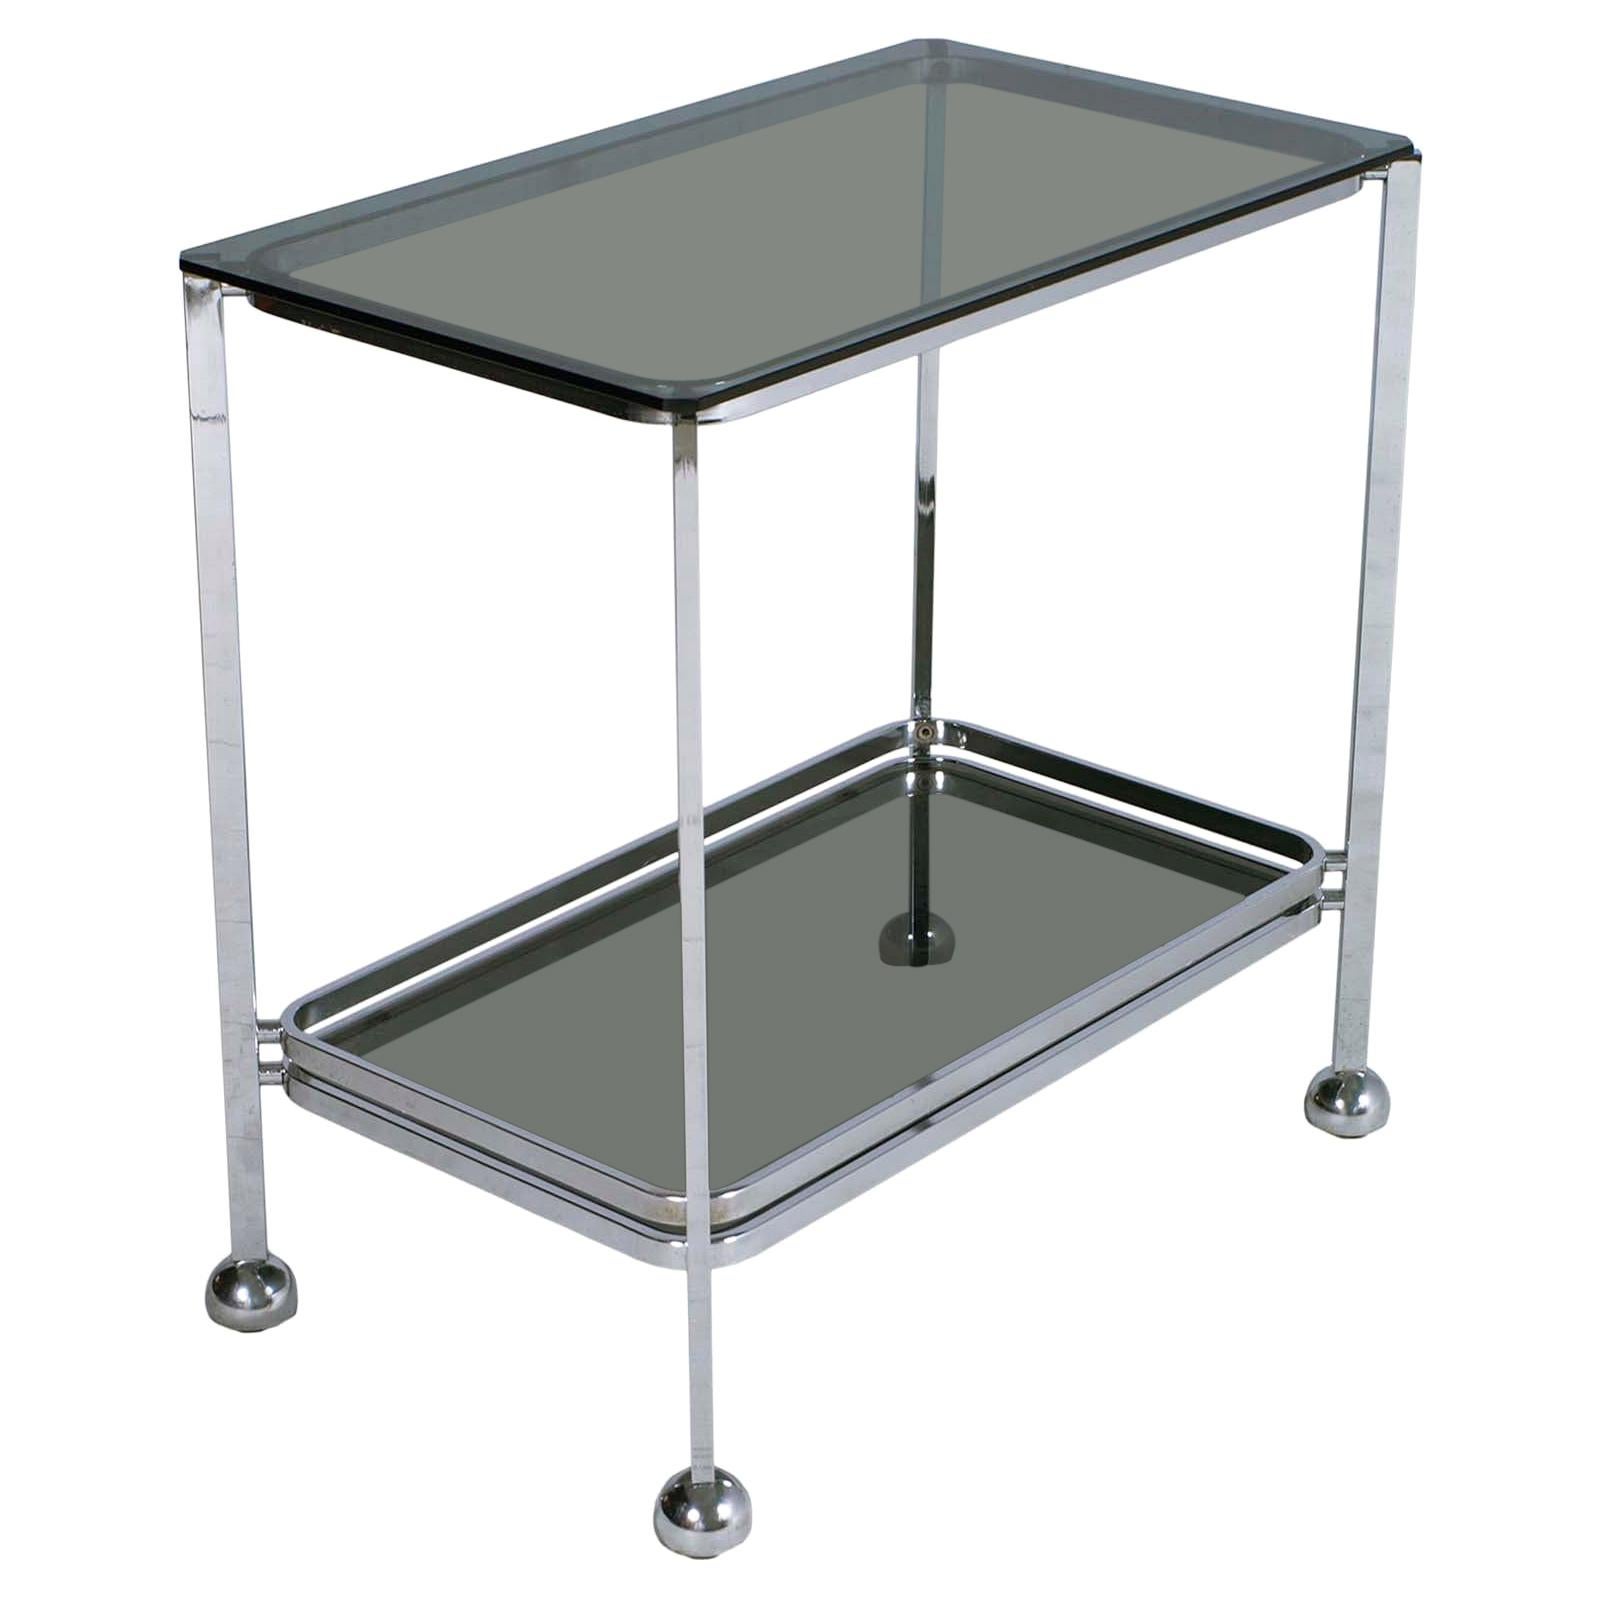 Italy 1970s Minimalist Chrome Steel and Fumè Tempered Glass Trolley Bar Cart